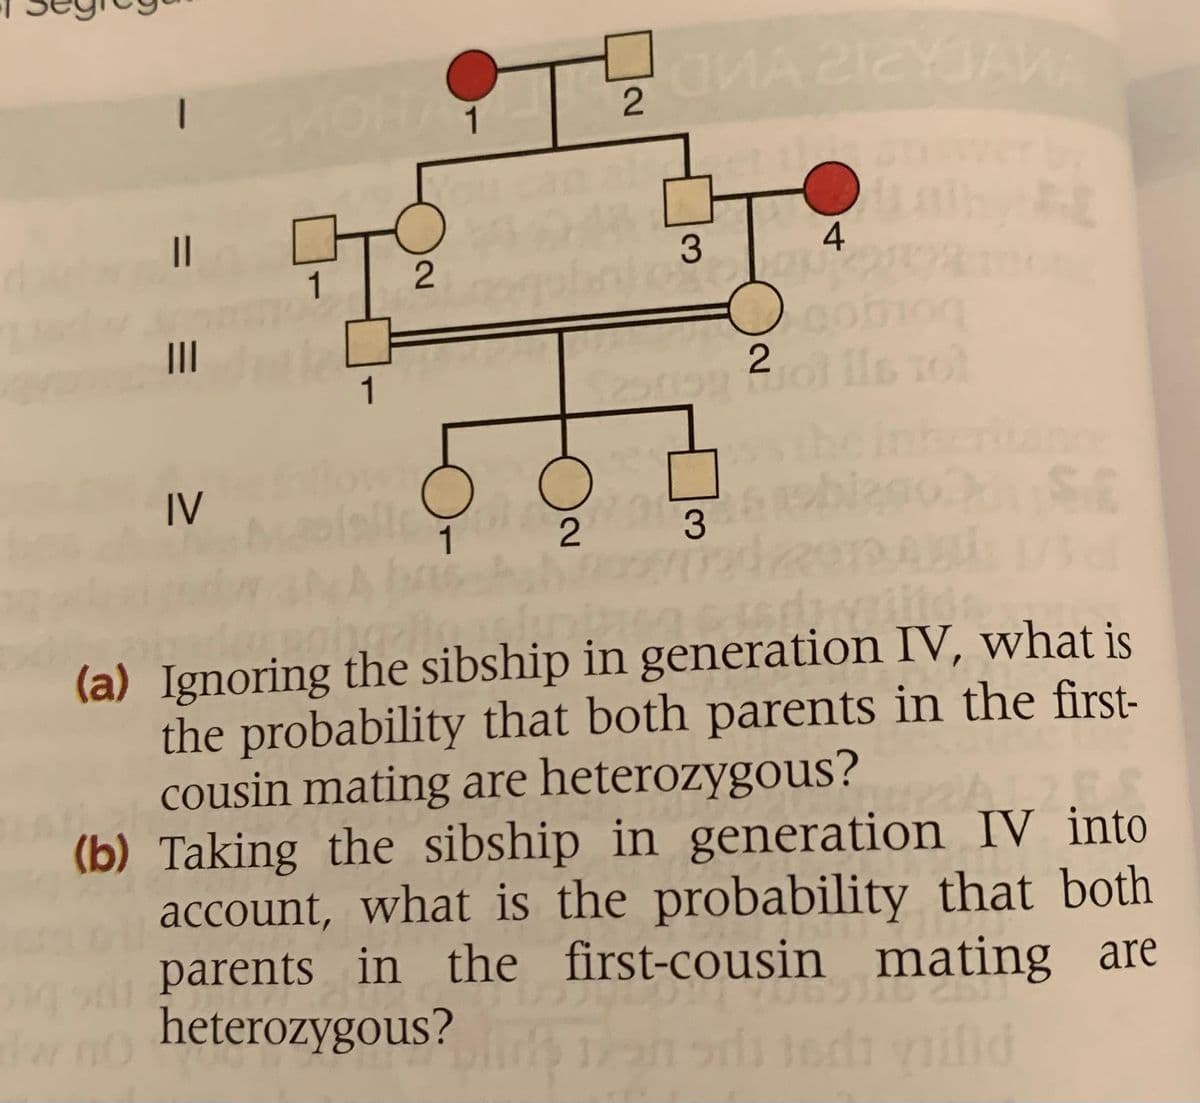 1
||
3
4
1
oob
2 ls ro
II
1
IV
3
(a) Ignoring the sibship in generation IV, what is
the probability that both parents in the first-
cousin mating are heterozygous?
(b) Taking the sibship in generation IV into
account, what is the probability that both
parents in the first-cousin mating are
heterozygous?
dar
nifld
2.
2.
